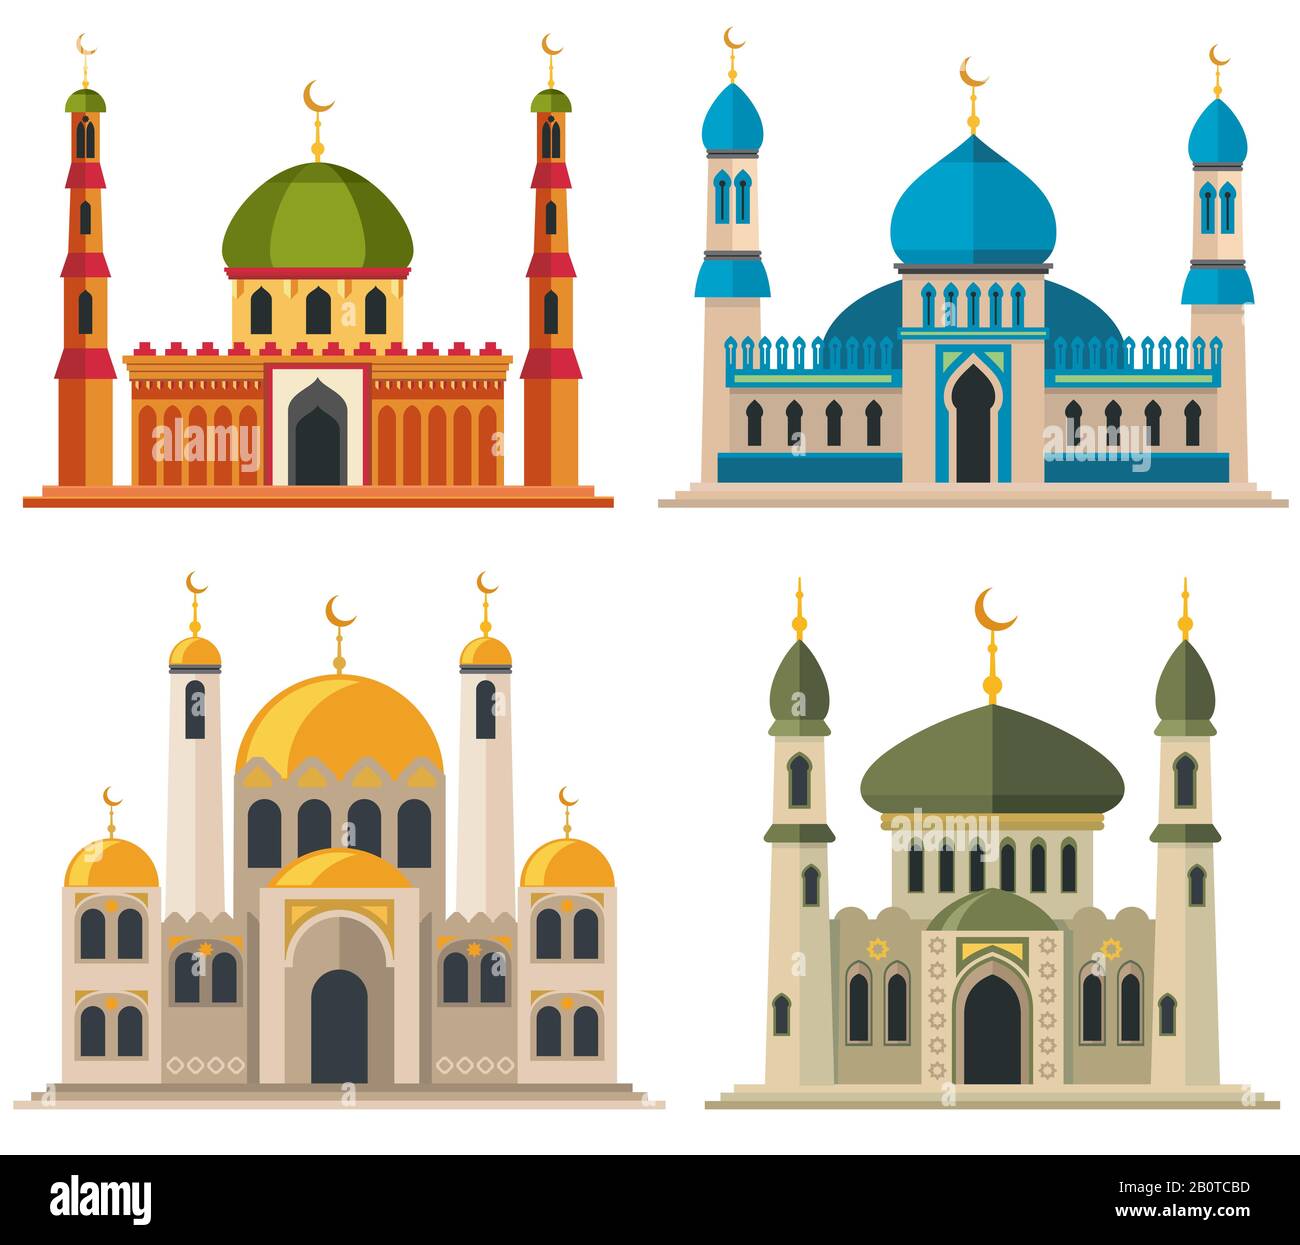 Arabic muslim mosques and minarets. Religious eastern architecture cartoon buildings. Islam architecture traditional, illustration of religious islam building Stock Vector